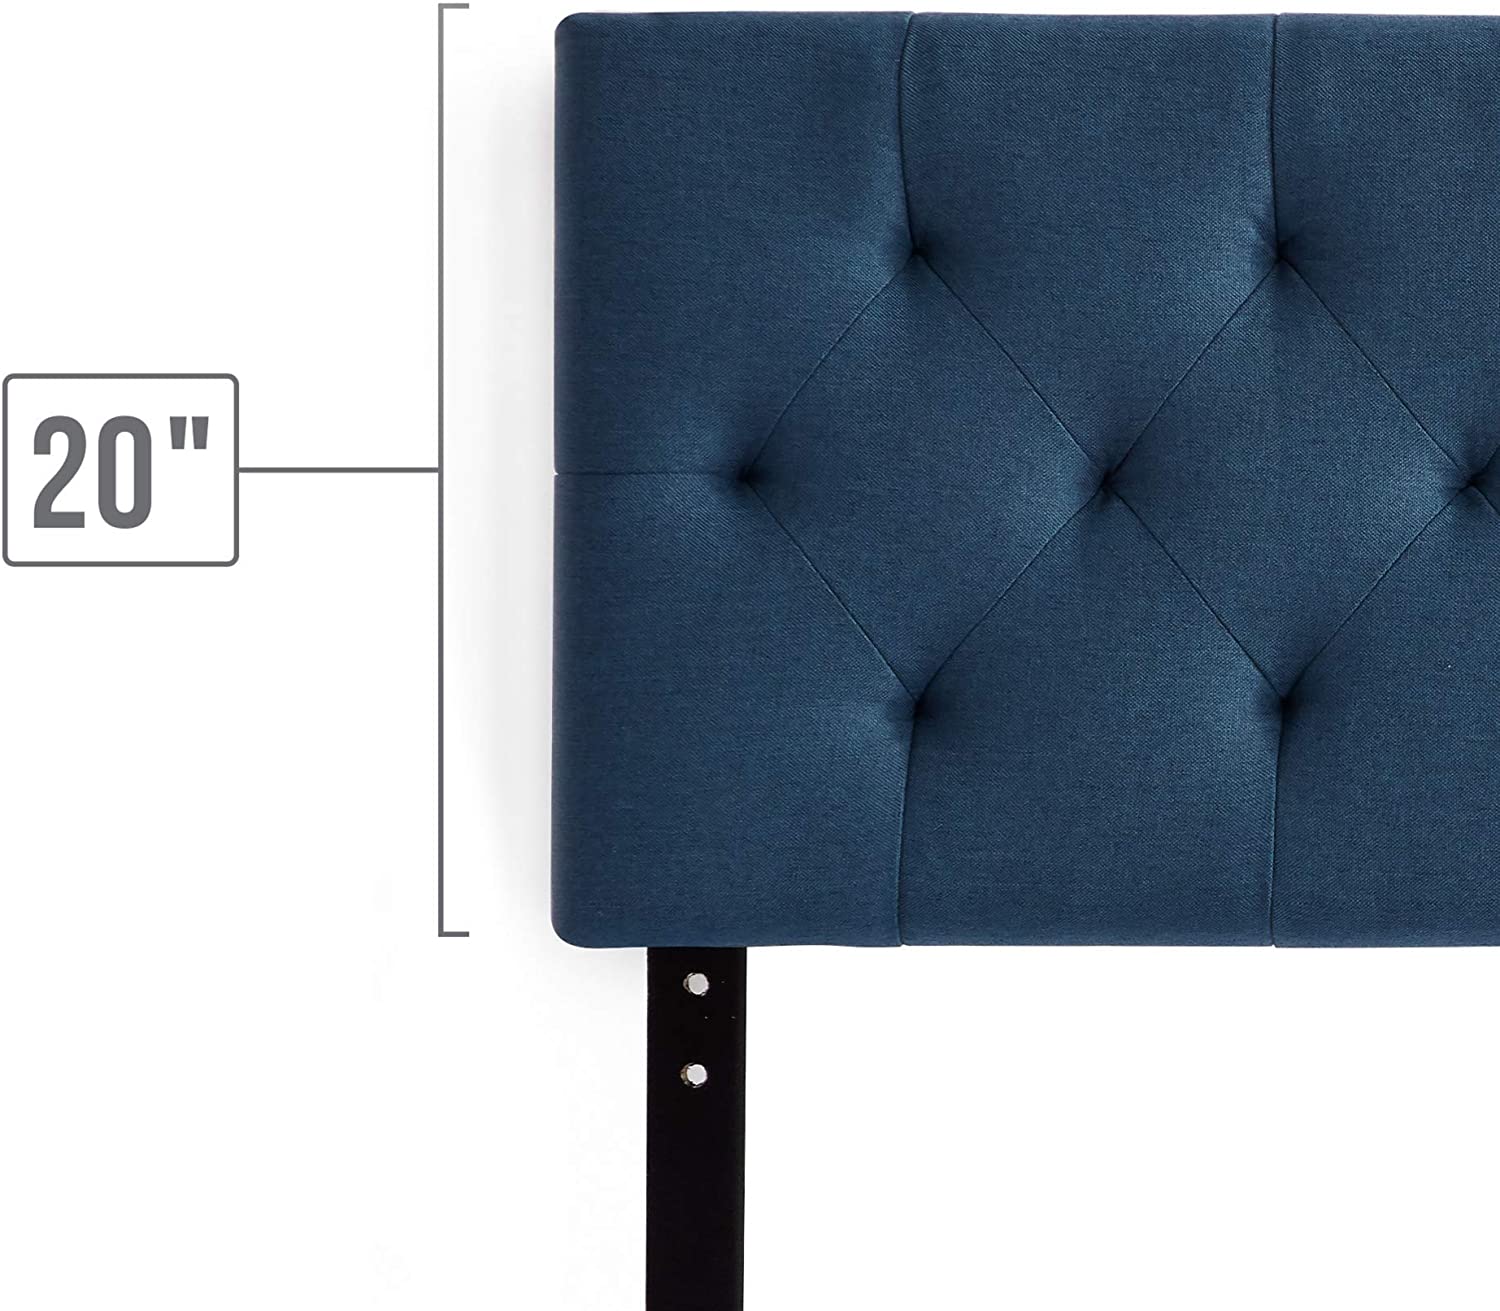 LUCID Mid-Rise Upholstered Headboard-Adjustable Height from 34” to 46”, King/Cal King, Cobalt